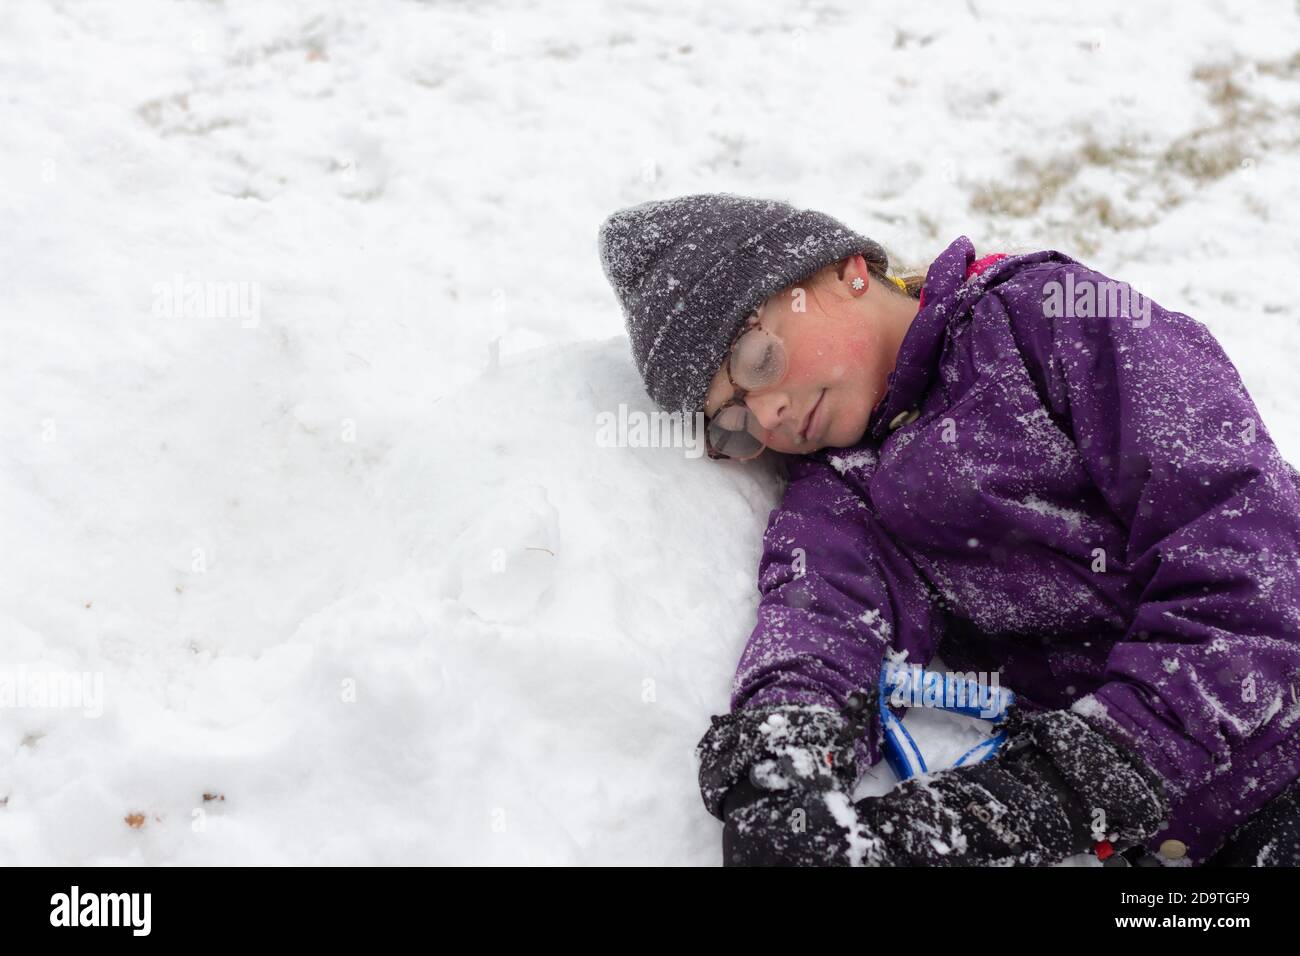 Child resting in snow enjoying being outside during snow fall Stock Photo